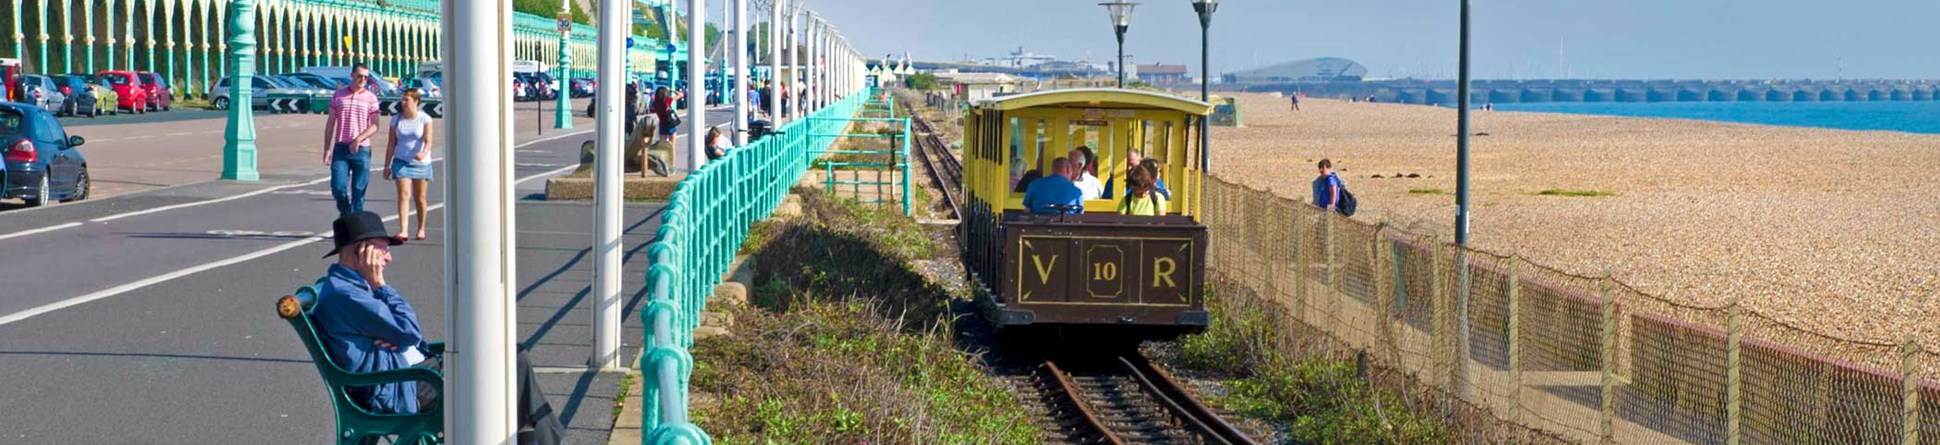 A small tourist train passing along Brighton seafront.